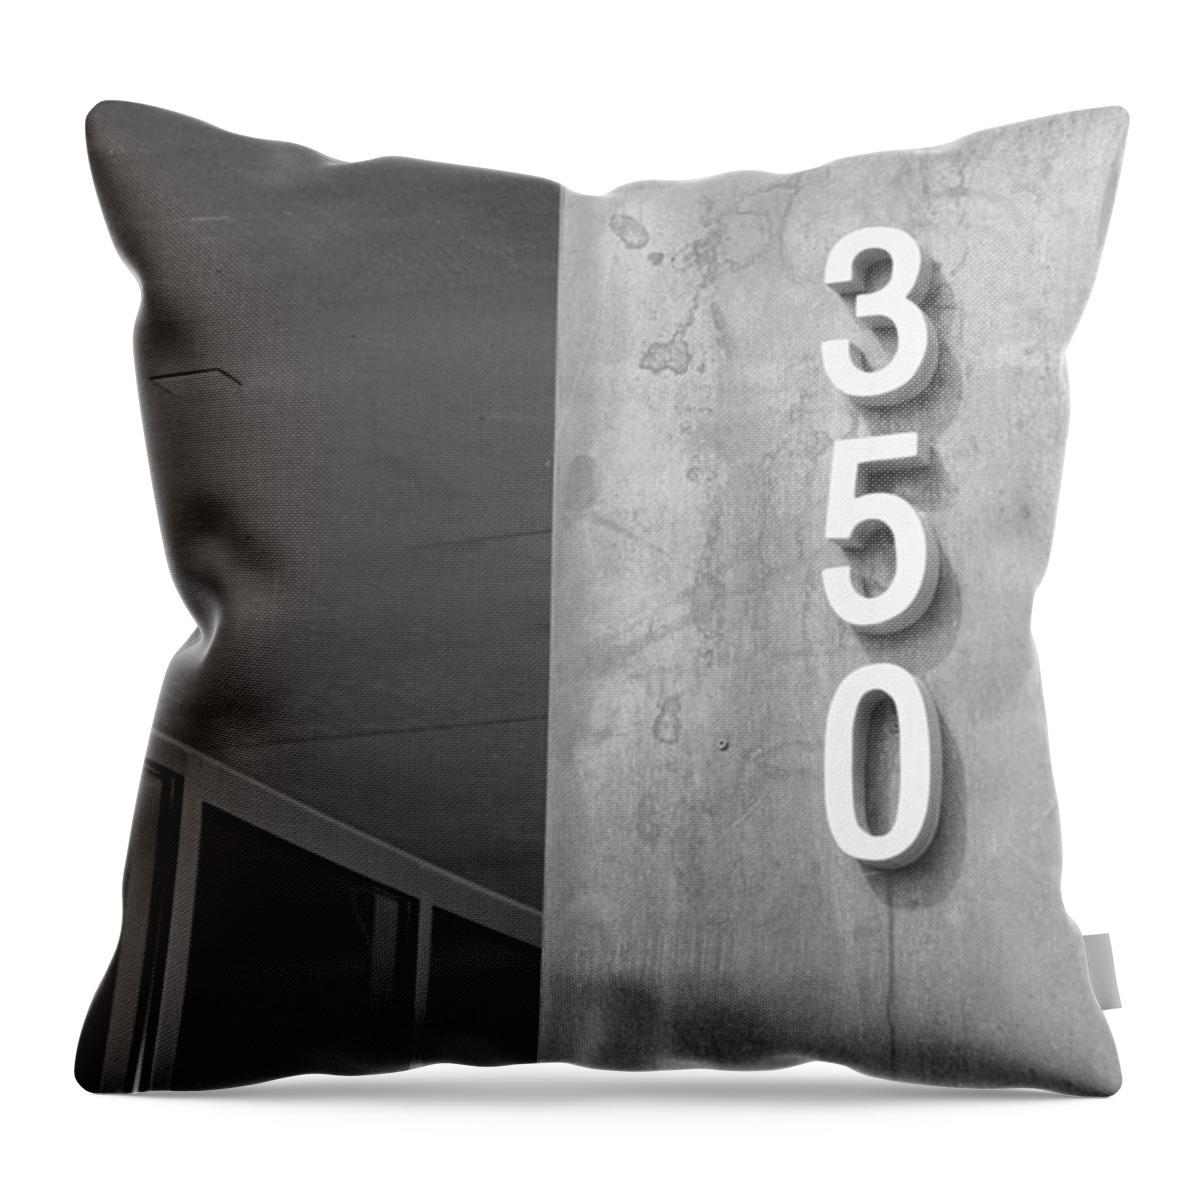 Black White Monochrome Street Film 350 Number Building Address Throw Pillow featuring the photograph 350 by Ken DePue